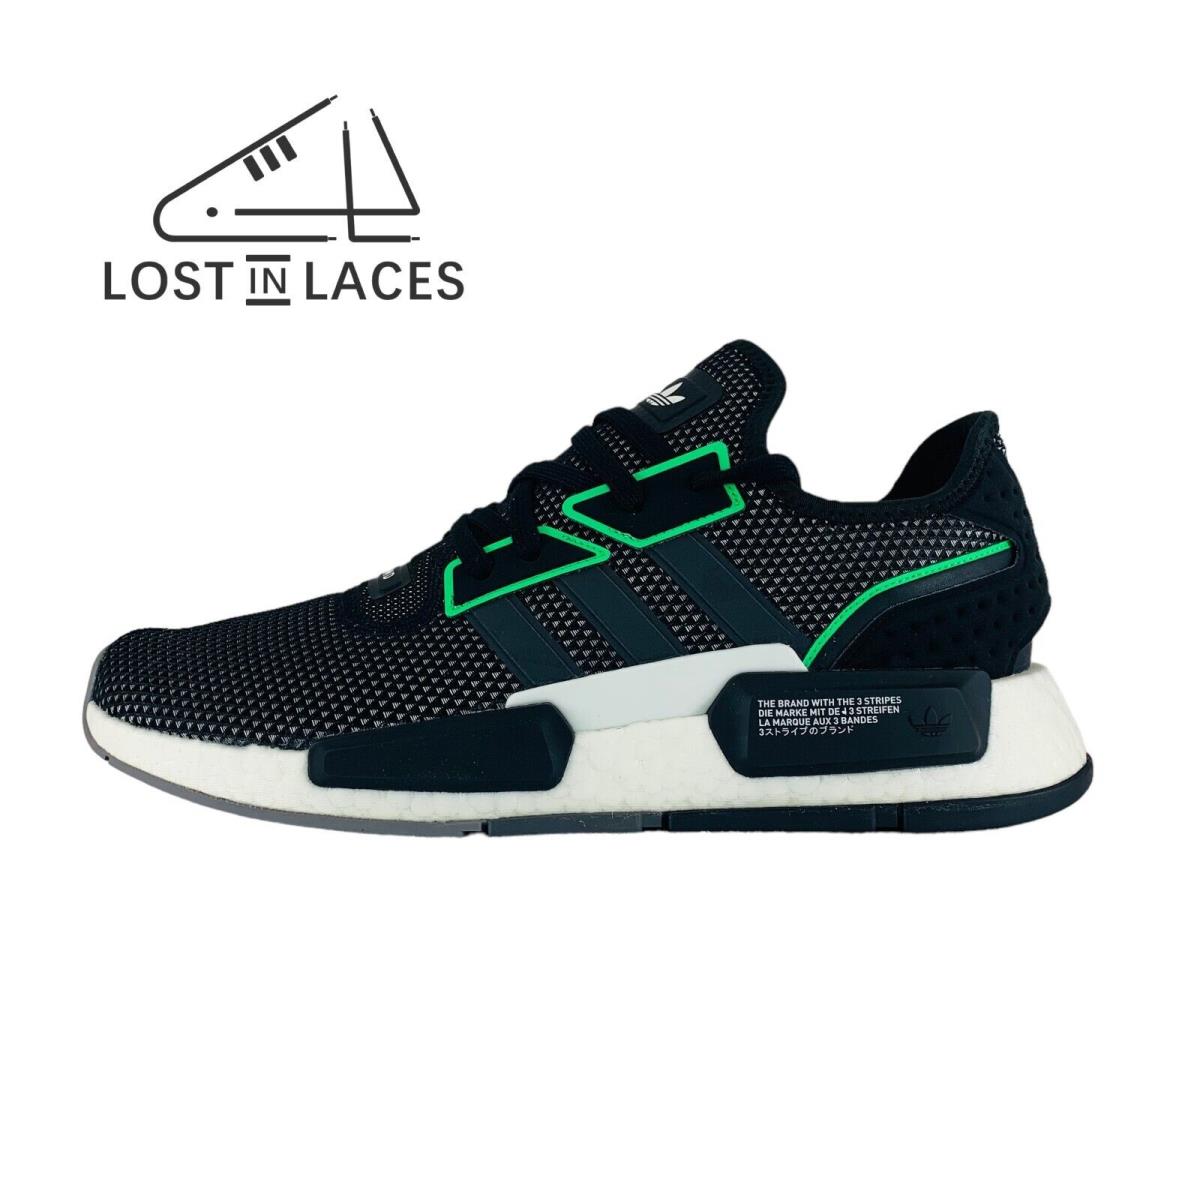 Adidas NMD_G1 Black Green Lifestyle Sneakers Men`s Shoes IE4559 - Black